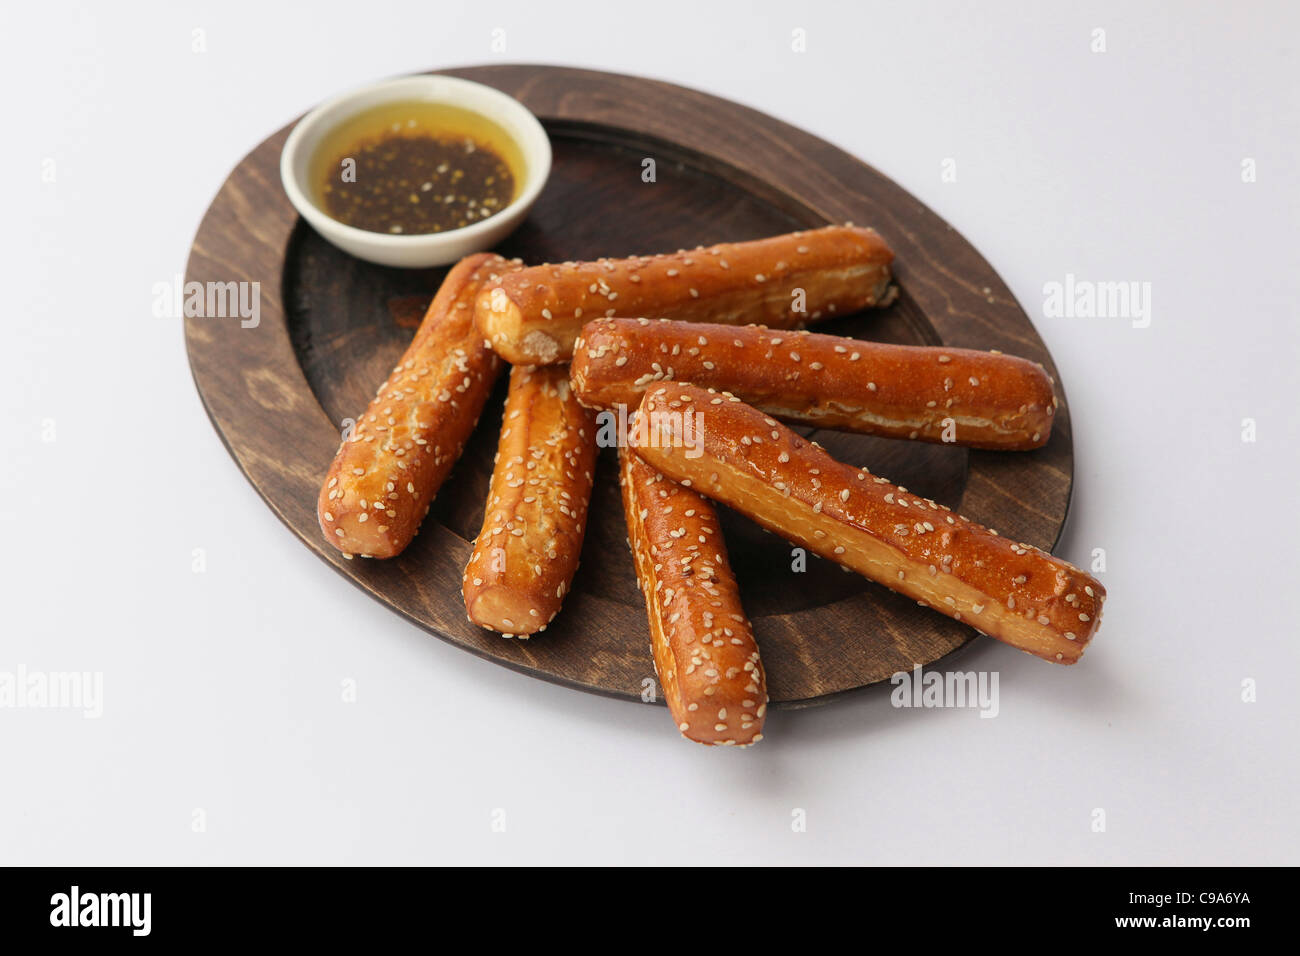 Grissini (Breadsticks) on wood plate and dip Stock Photo